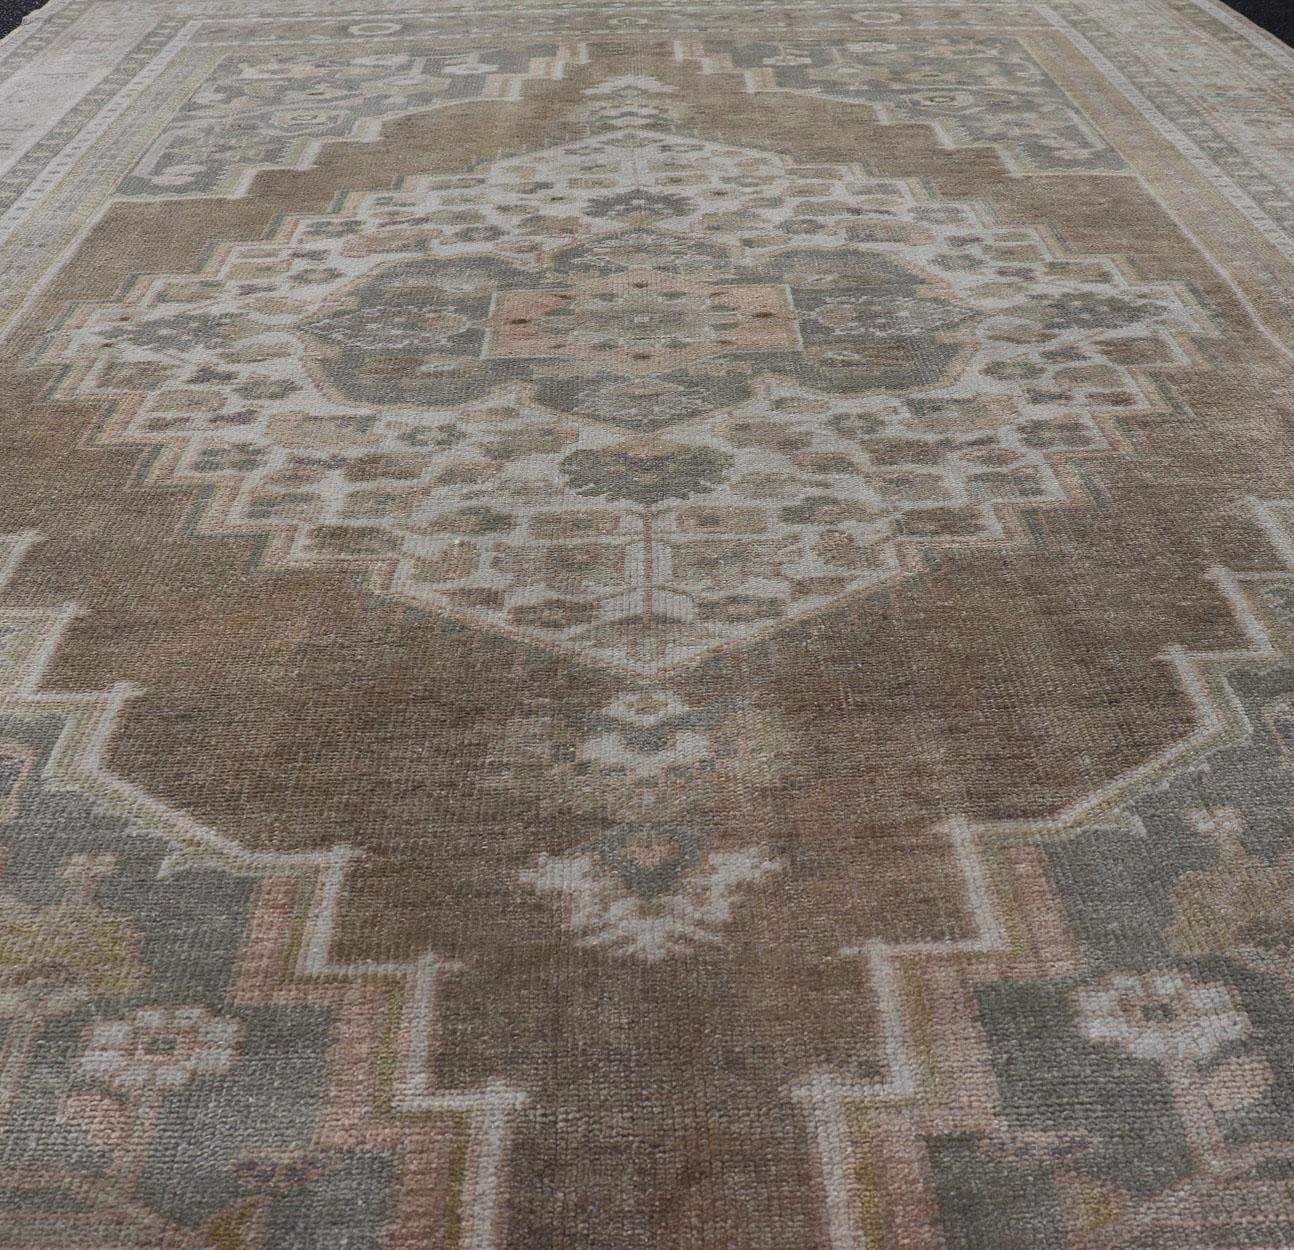 Wool Vintage Oushak Rug from Turkey with Muted Colors and Floral Medallion For Sale